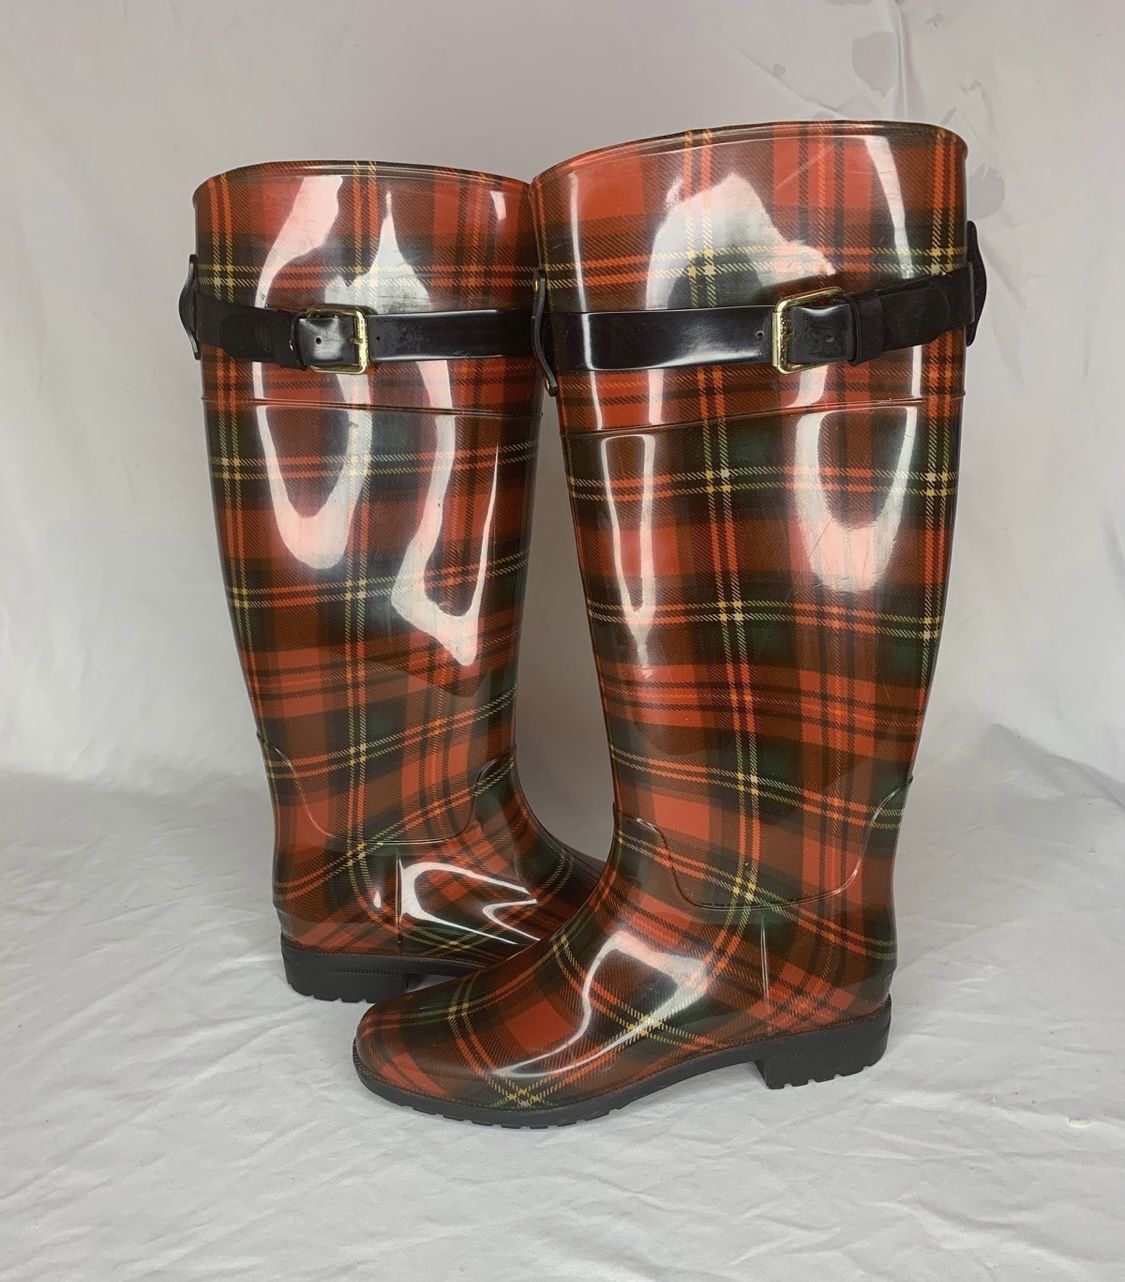 Lauren Ralph Lauren Rossalyn II plaid rain boots size 8 A few minor scratches, see pictures.  Pre-owned  Great condition